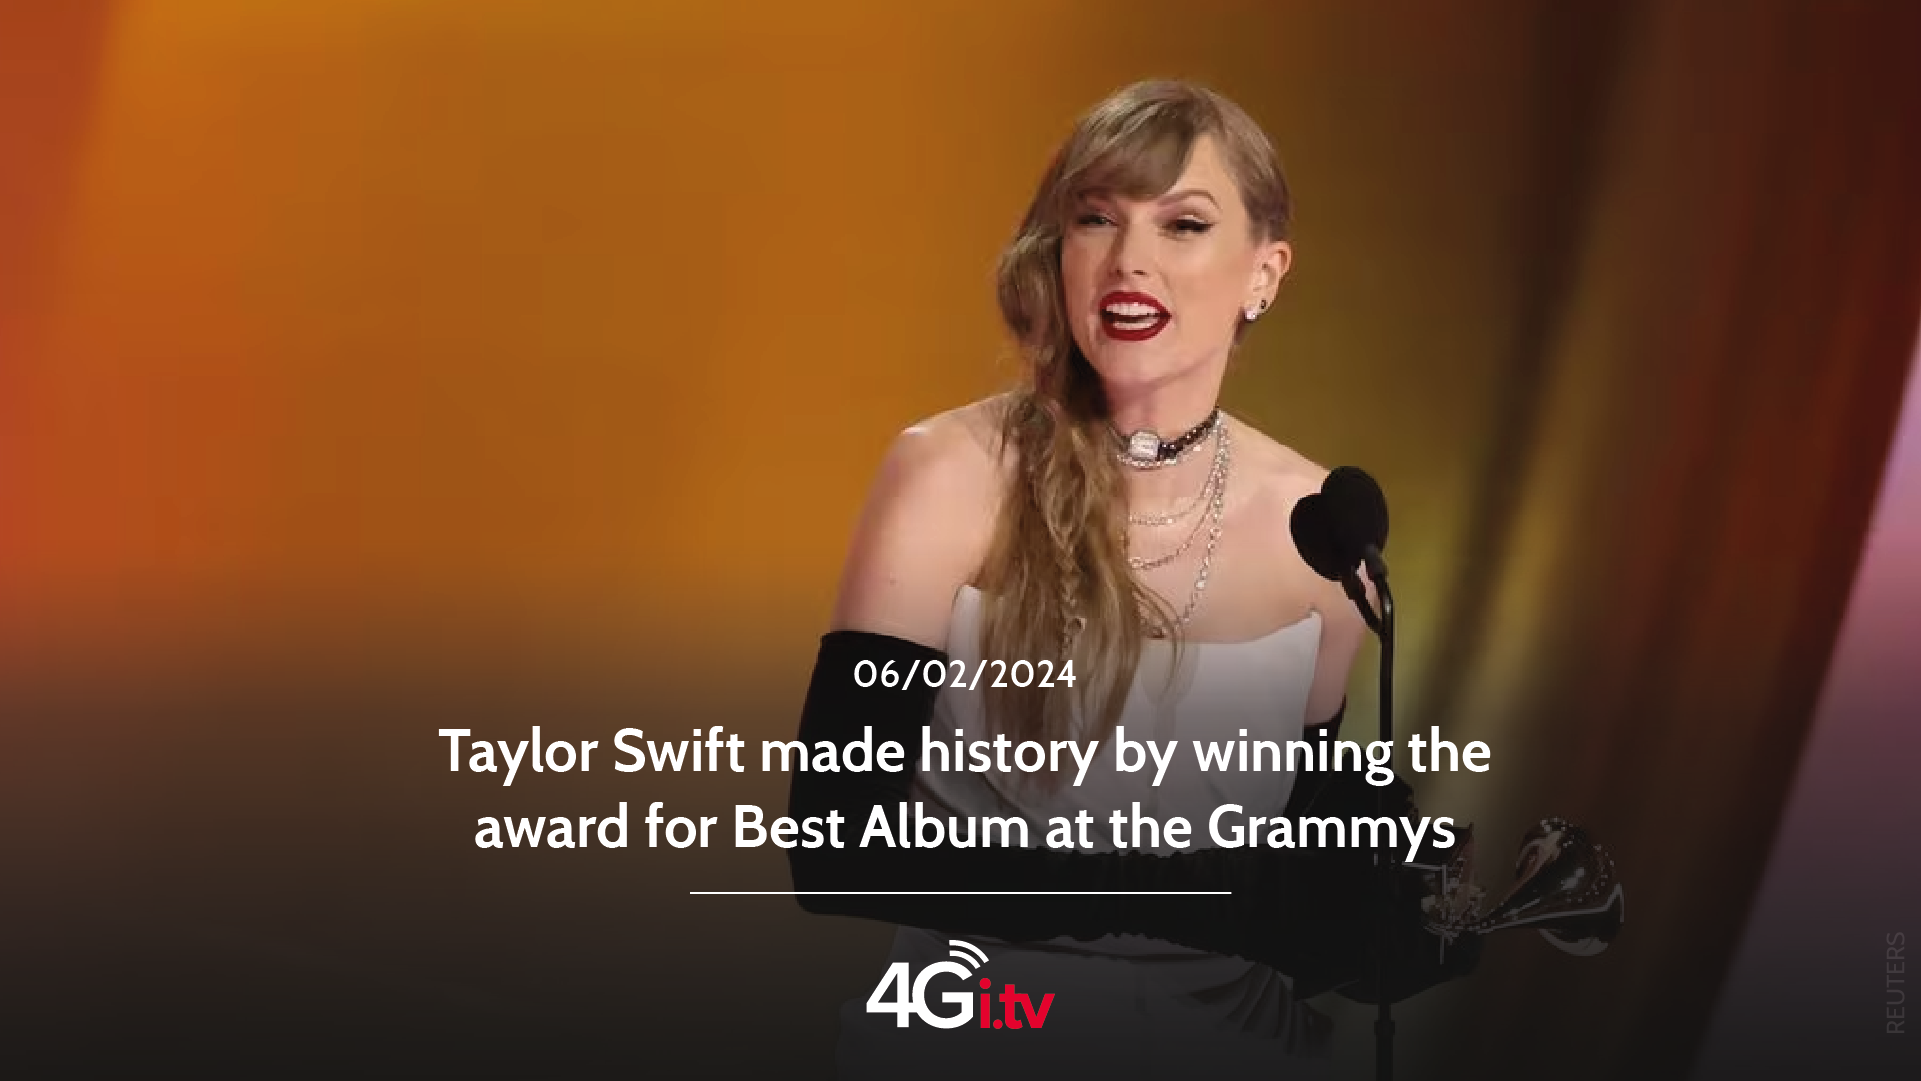 Подробнее о статье Taylor Swift made history by winning the award for Best Album at the Grammys